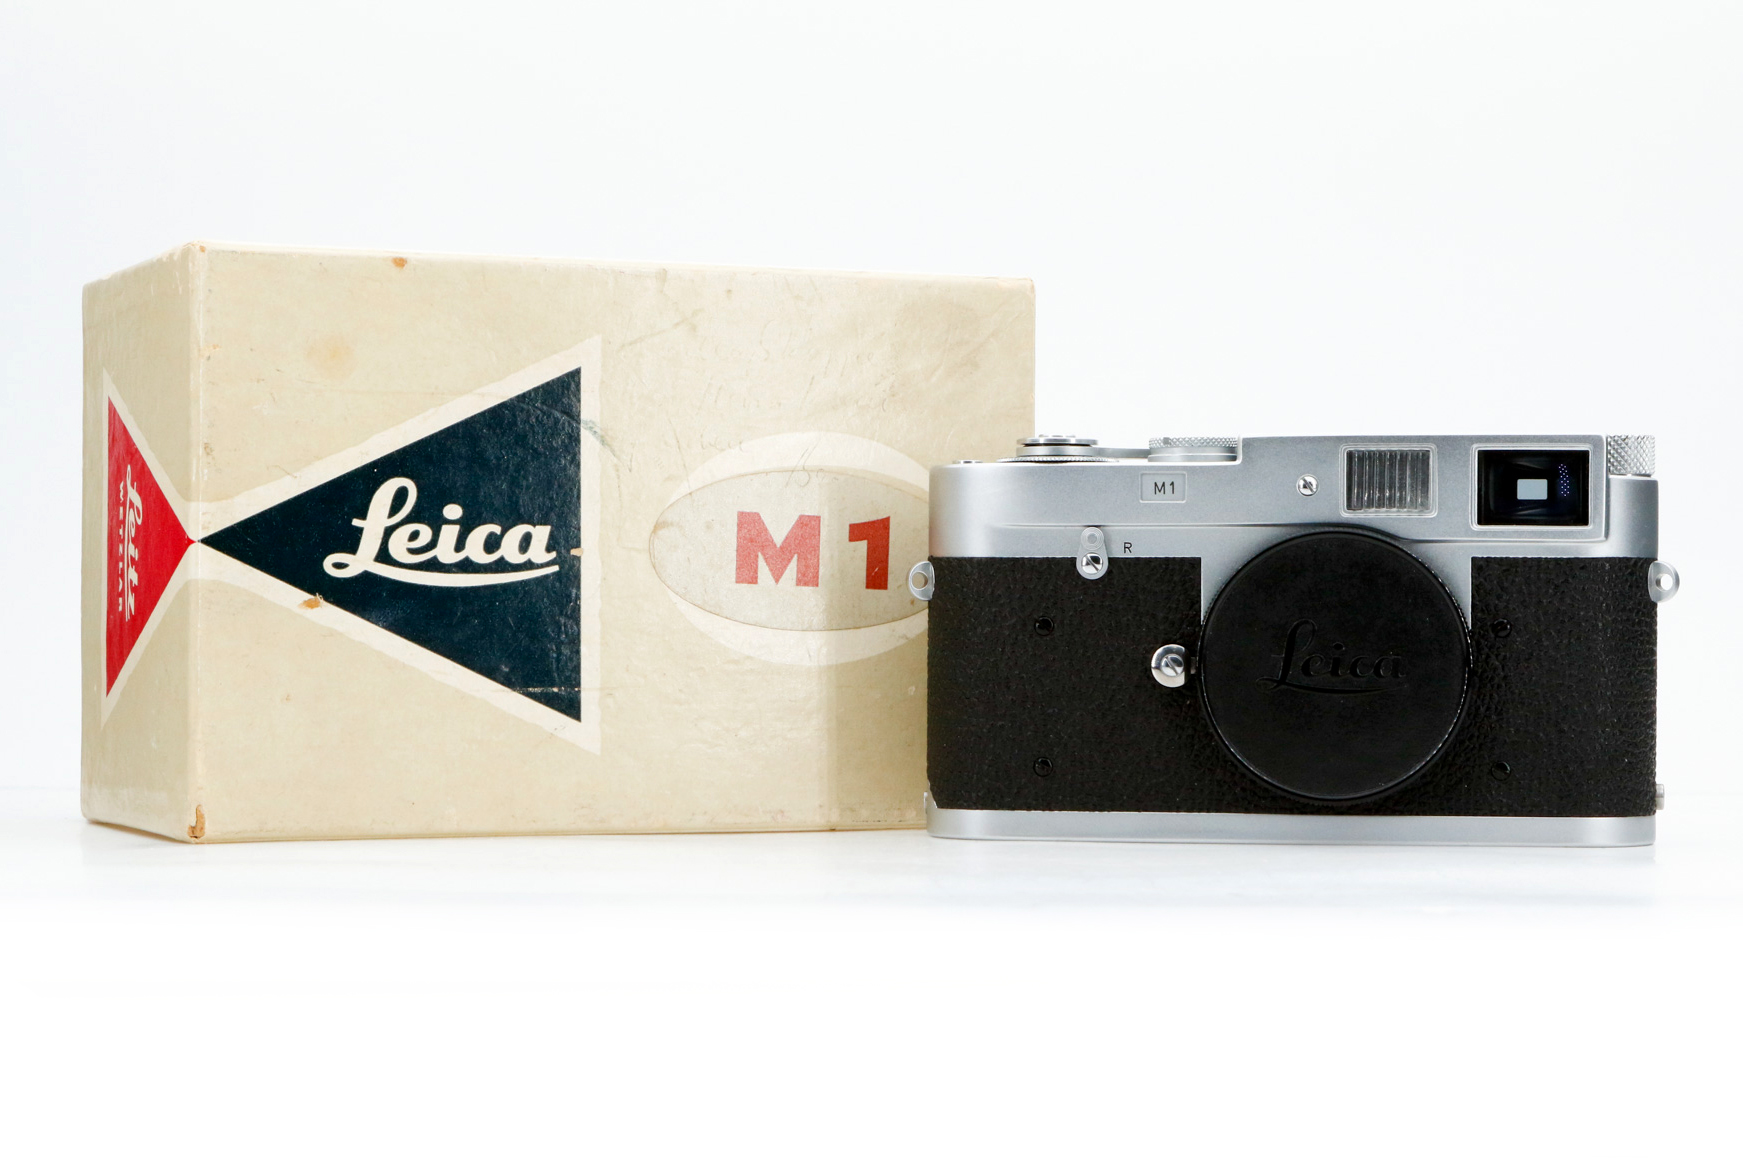 LEICA M1 silver chrome with original packaging